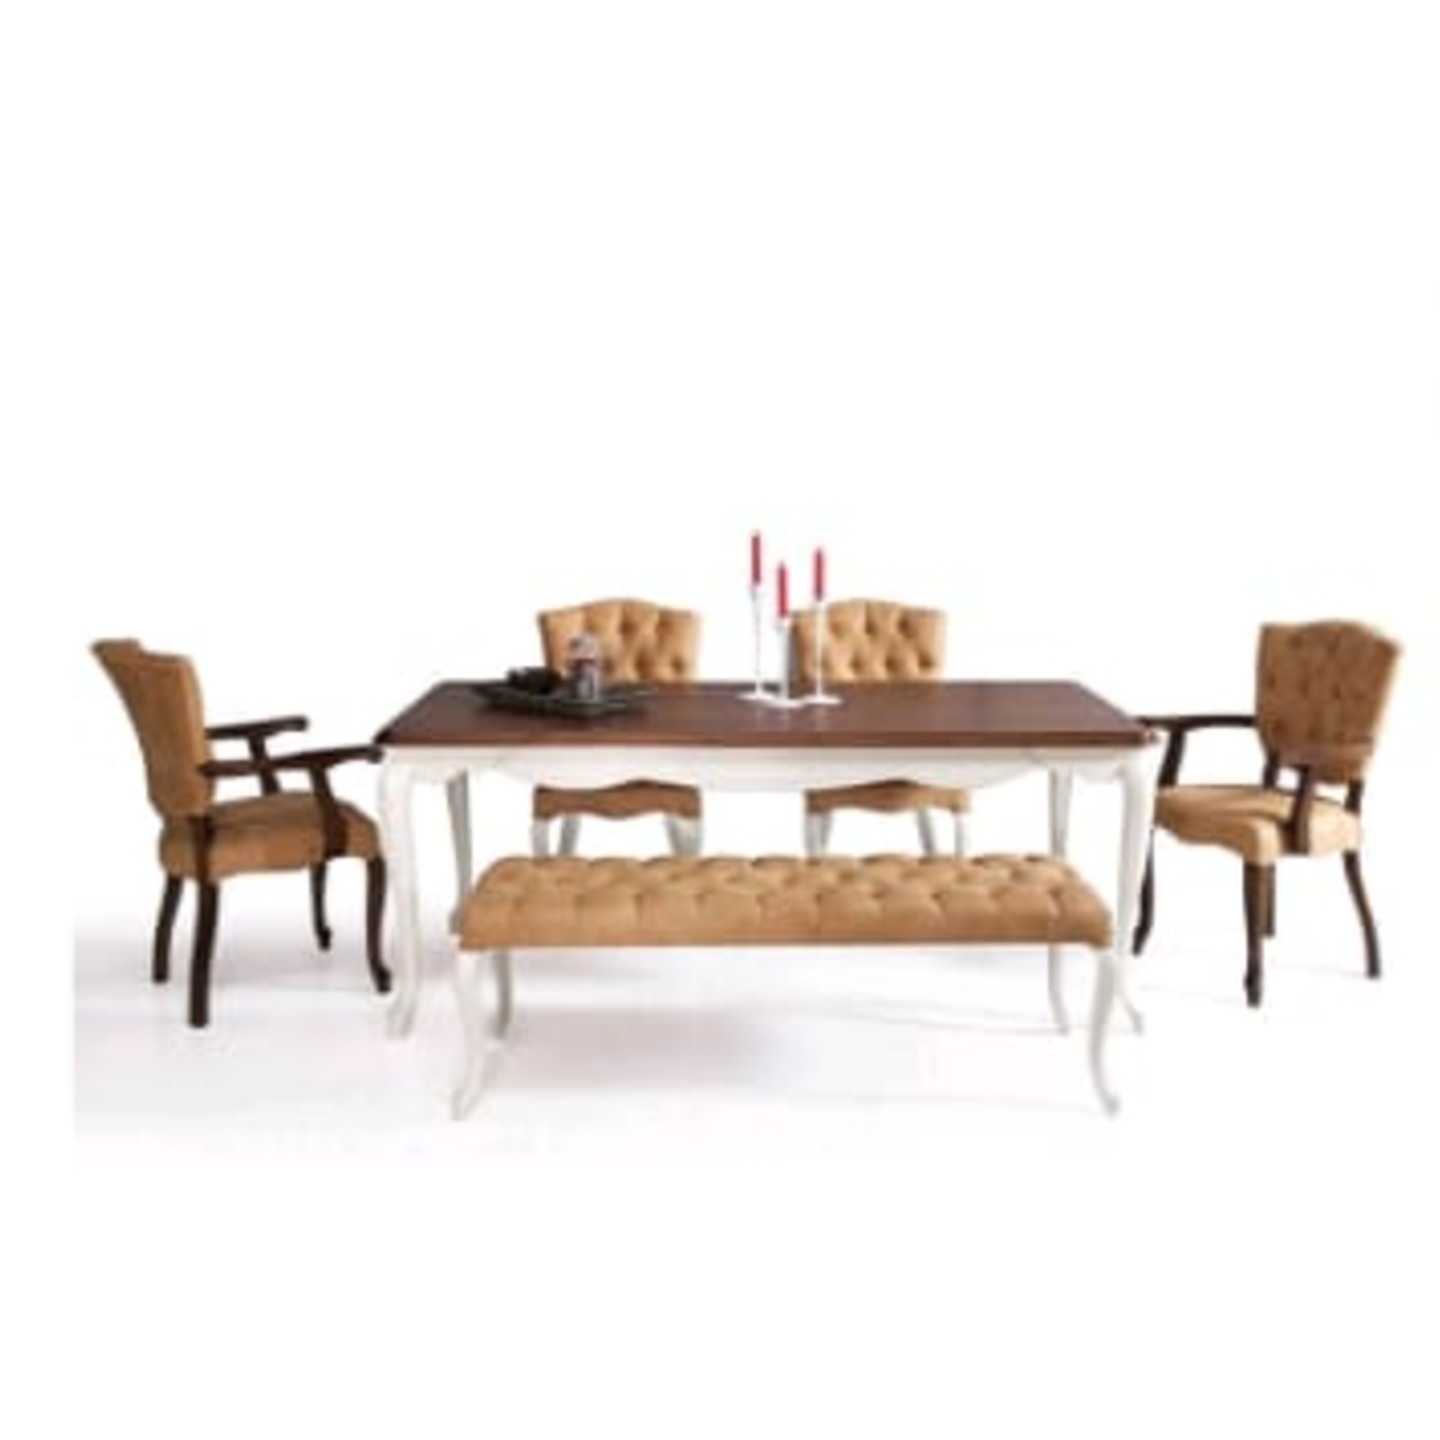 DW Marble Top H-005 Six Seater Dining Table Set in Brown Colour